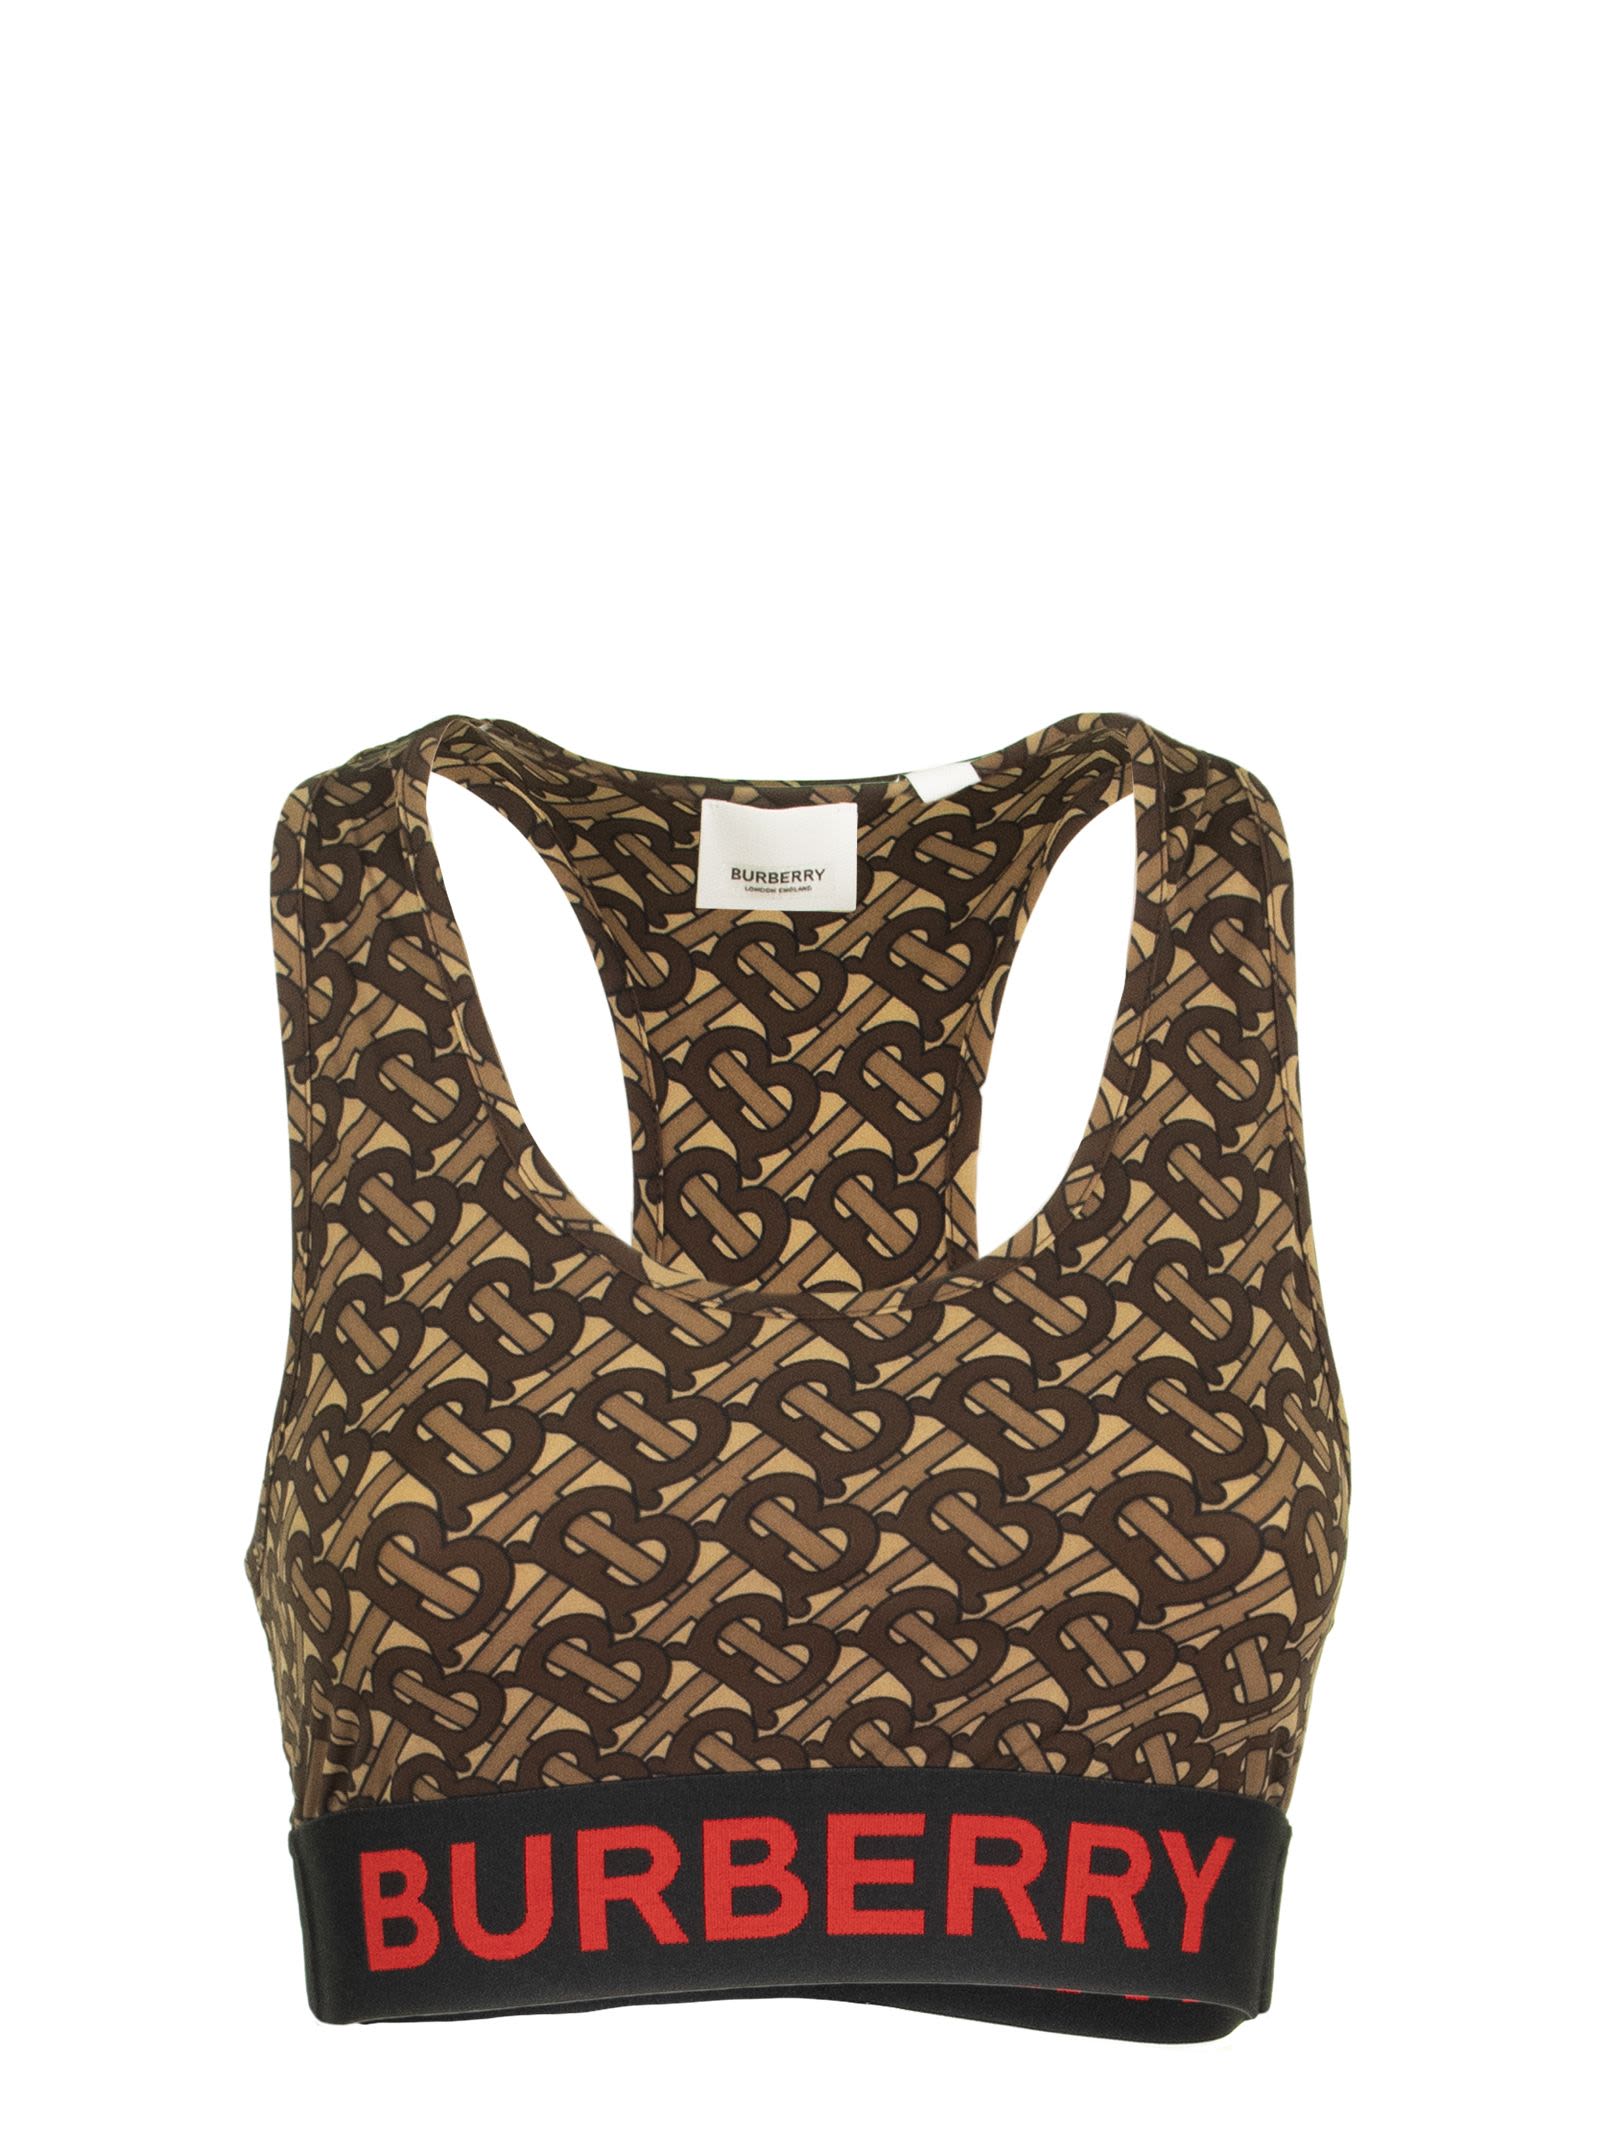 BURBERRY MONOGRAM PRINT STRETCH JERSEY CROPPED TOP,11203614